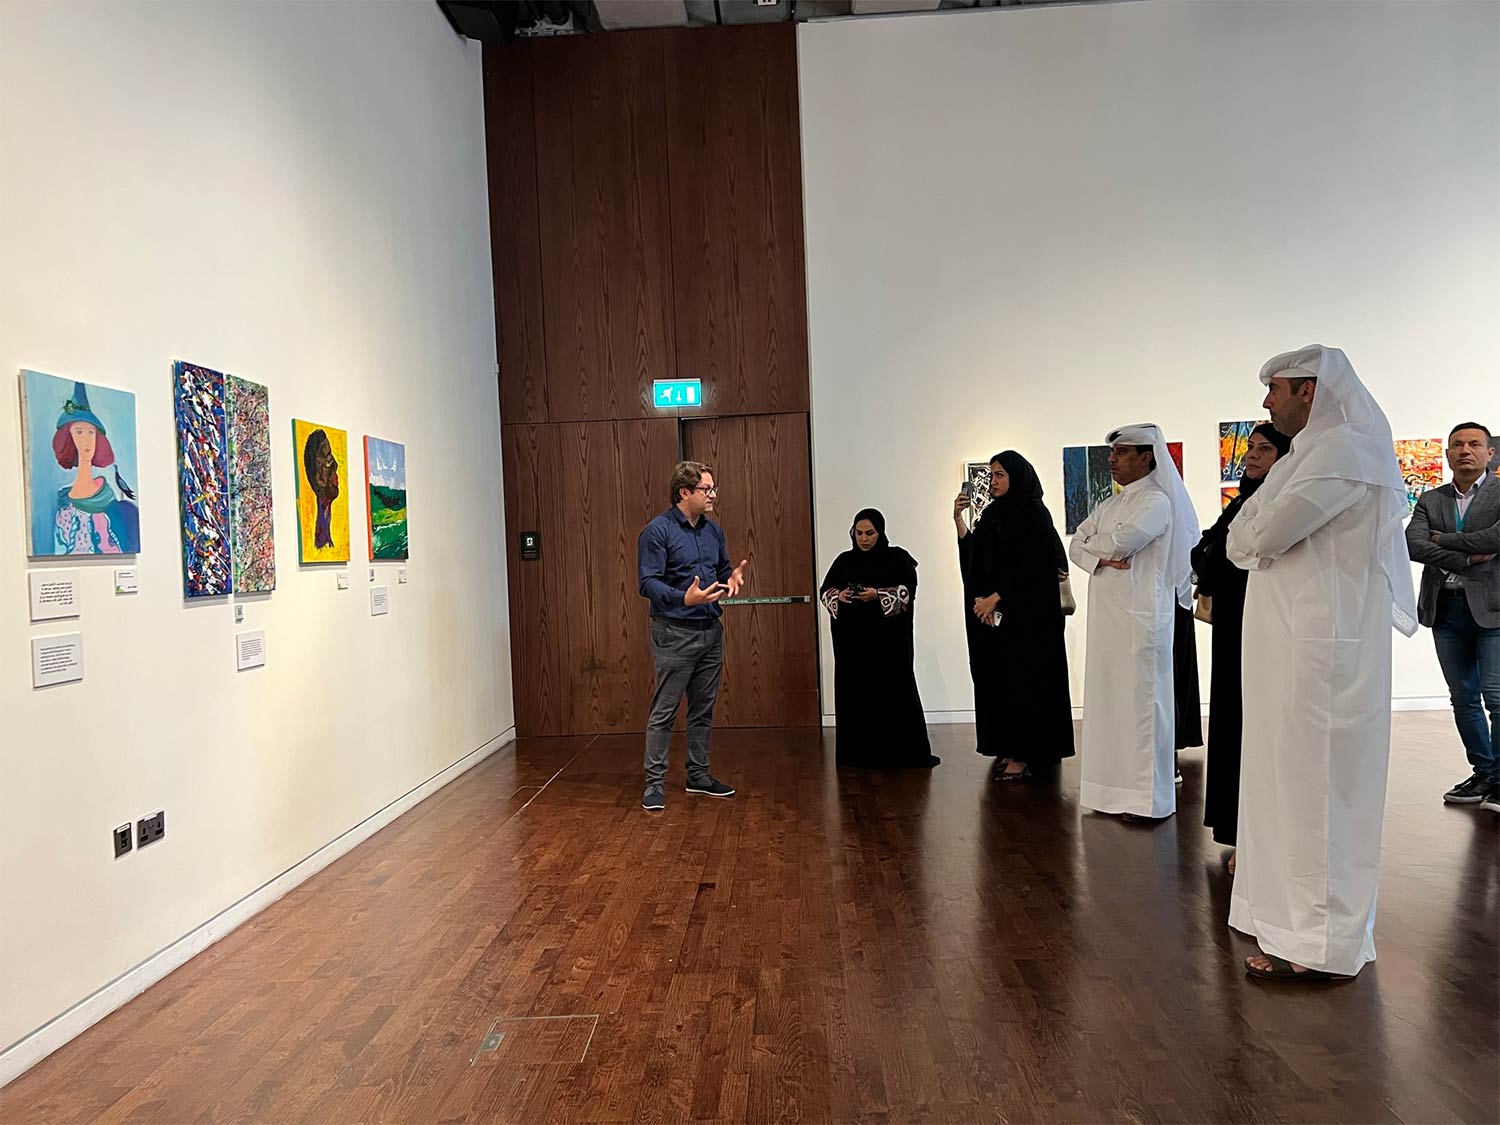 Msheireb Museums “Recovery Road” Exhibition